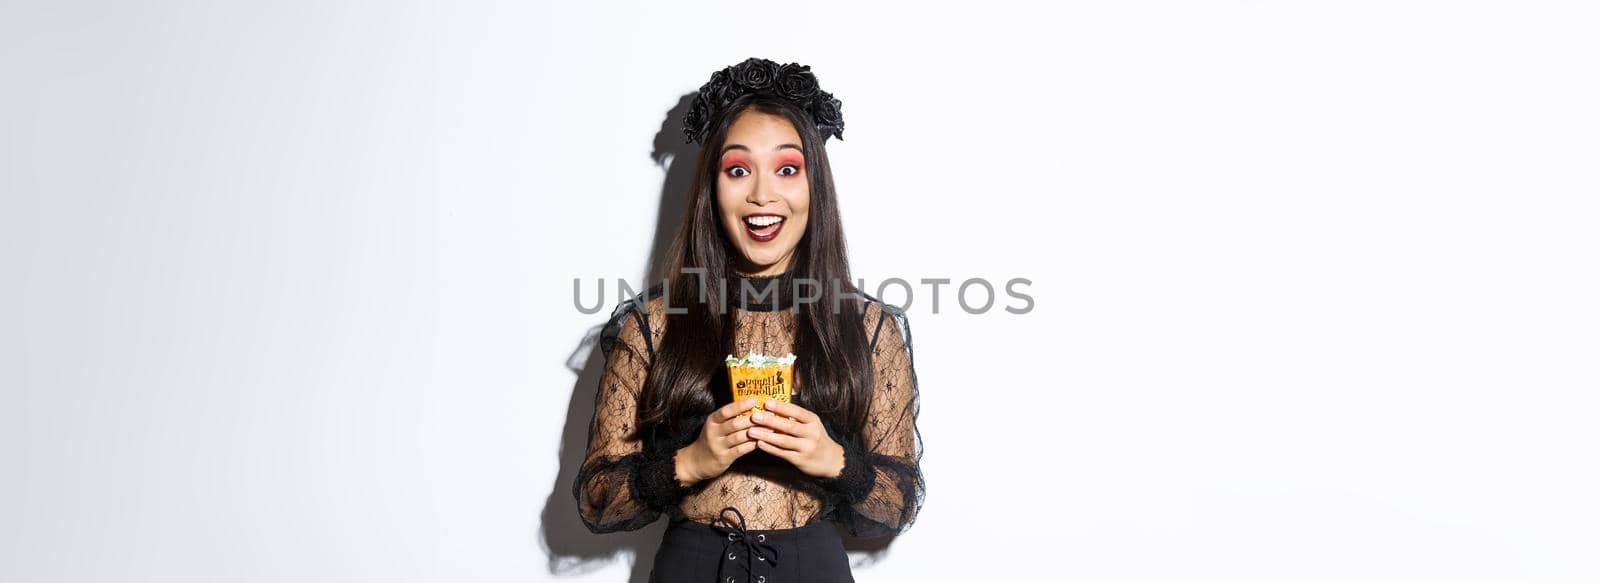 Beautiful asian girl smiling happy, holding sweets, wearing witch costume on halloween, enjoying trick or treating.